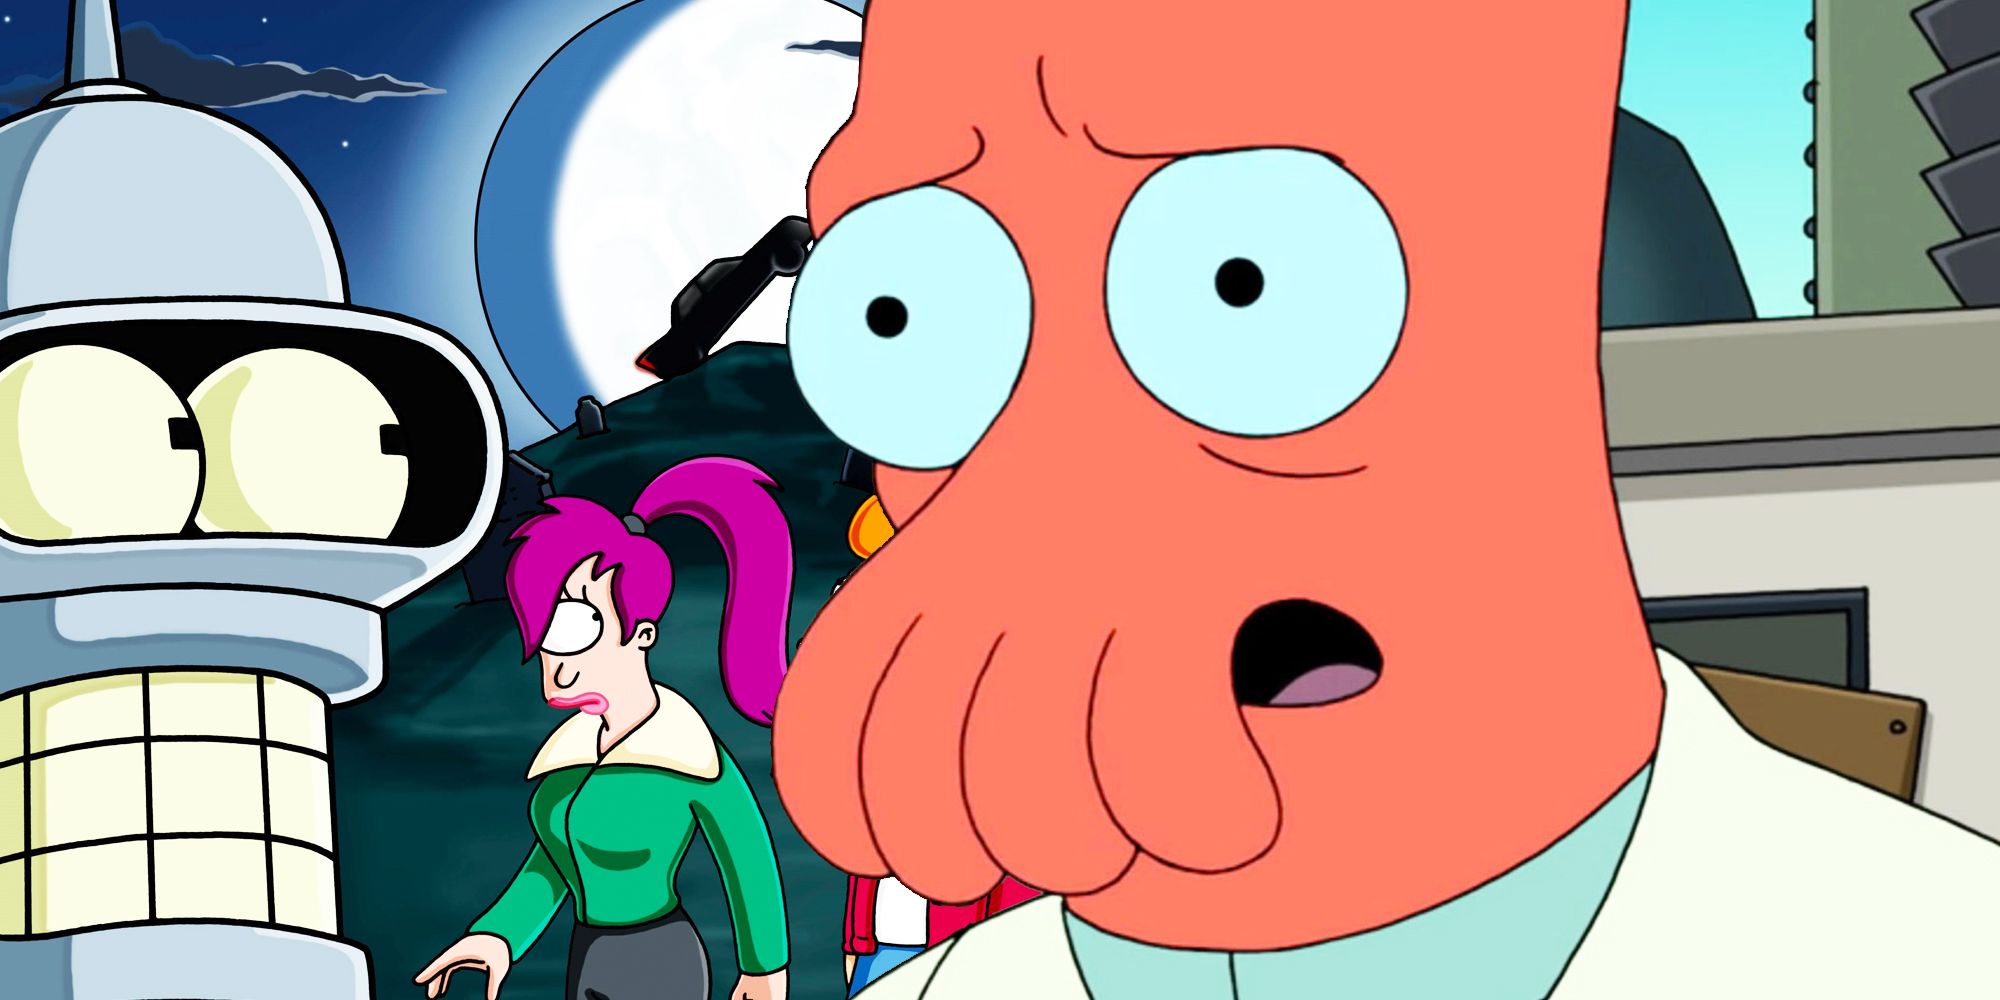 Zoidberg and a poster for The Honking